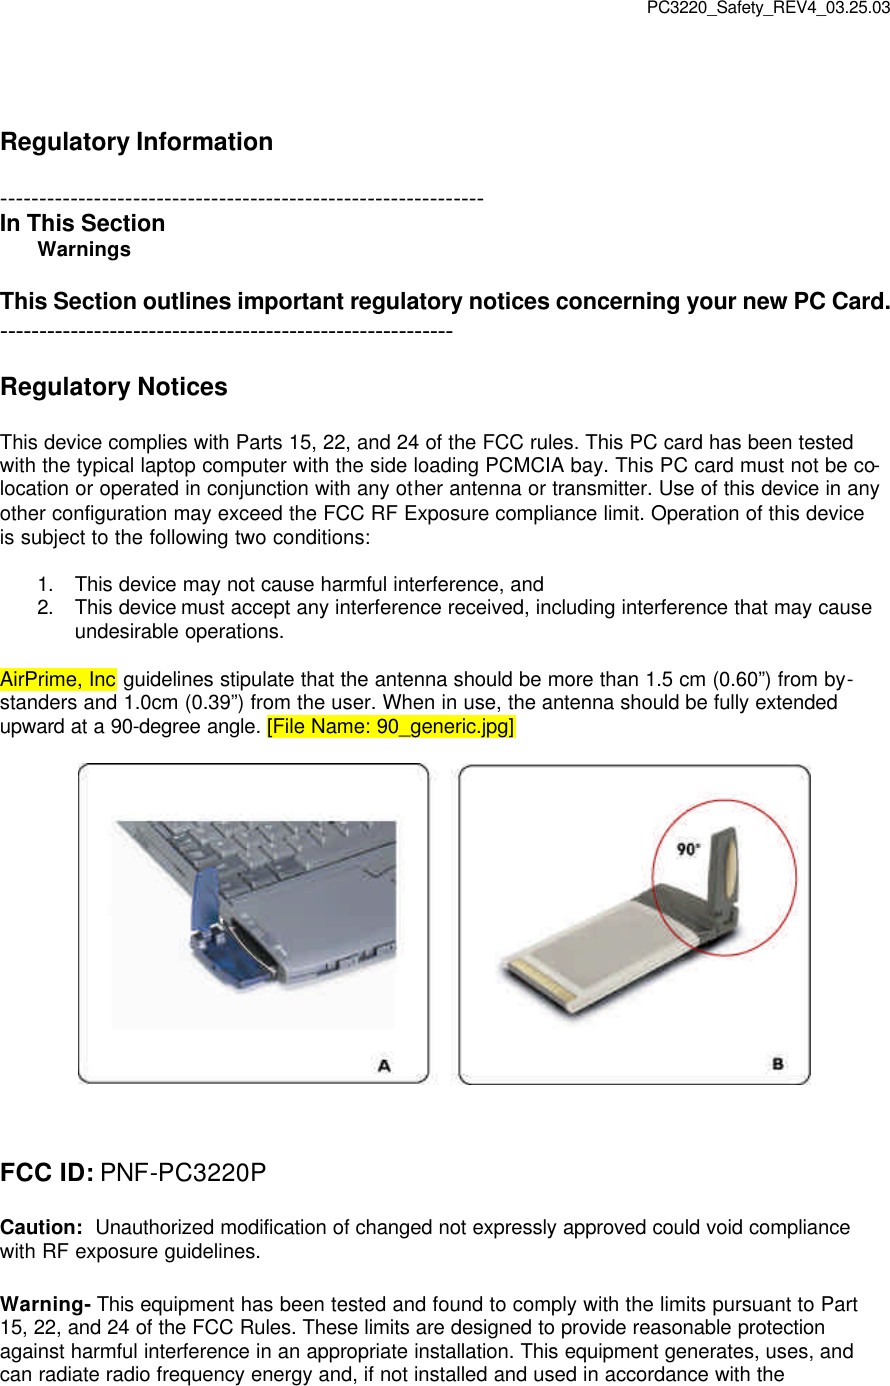 PC3220_Safety_REV4_03.25.03   Regulatory Information  -------------------------------------------------------------- In This Section Warnings    This Section outlines important regulatory notices concerning your new PC Card. ----------------------------------------------------------  Regulatory Notices  This device complies with Parts 15, 22, and 24 of the FCC rules. This PC card has been tested with the typical laptop computer with the side loading PCMCIA bay. This PC card must not be co-location or operated in conjunction with any other antenna or transmitter. Use of this device in any other configuration may exceed the FCC RF Exposure compliance limit. Operation of this device is subject to the following two conditions:  1. This device may not cause harmful interference, and 2. This device must accept any interference received, including interference that may cause undesirable operations.  AirPrime, Inc guidelines stipulate that the antenna should be more than 1.5 cm (0.60”) from by-standers and 1.0cm (0.39”) from the user. When in use, the antenna should be fully extended upward at a 90-degree angle. [File Name: 90_generic.jpg]      FCC ID: PNF-PC3220P  Caution:  Unauthorized modification of changed not expressly approved could void compliance with RF exposure guidelines.  Warning- This equipment has been tested and found to comply with the limits pursuant to Part 15, 22, and 24 of the FCC Rules. These limits are designed to provide reasonable protection against harmful interference in an appropriate installation. This equipment generates, uses, and can radiate radio frequency energy and, if not installed and used in accordance with the 